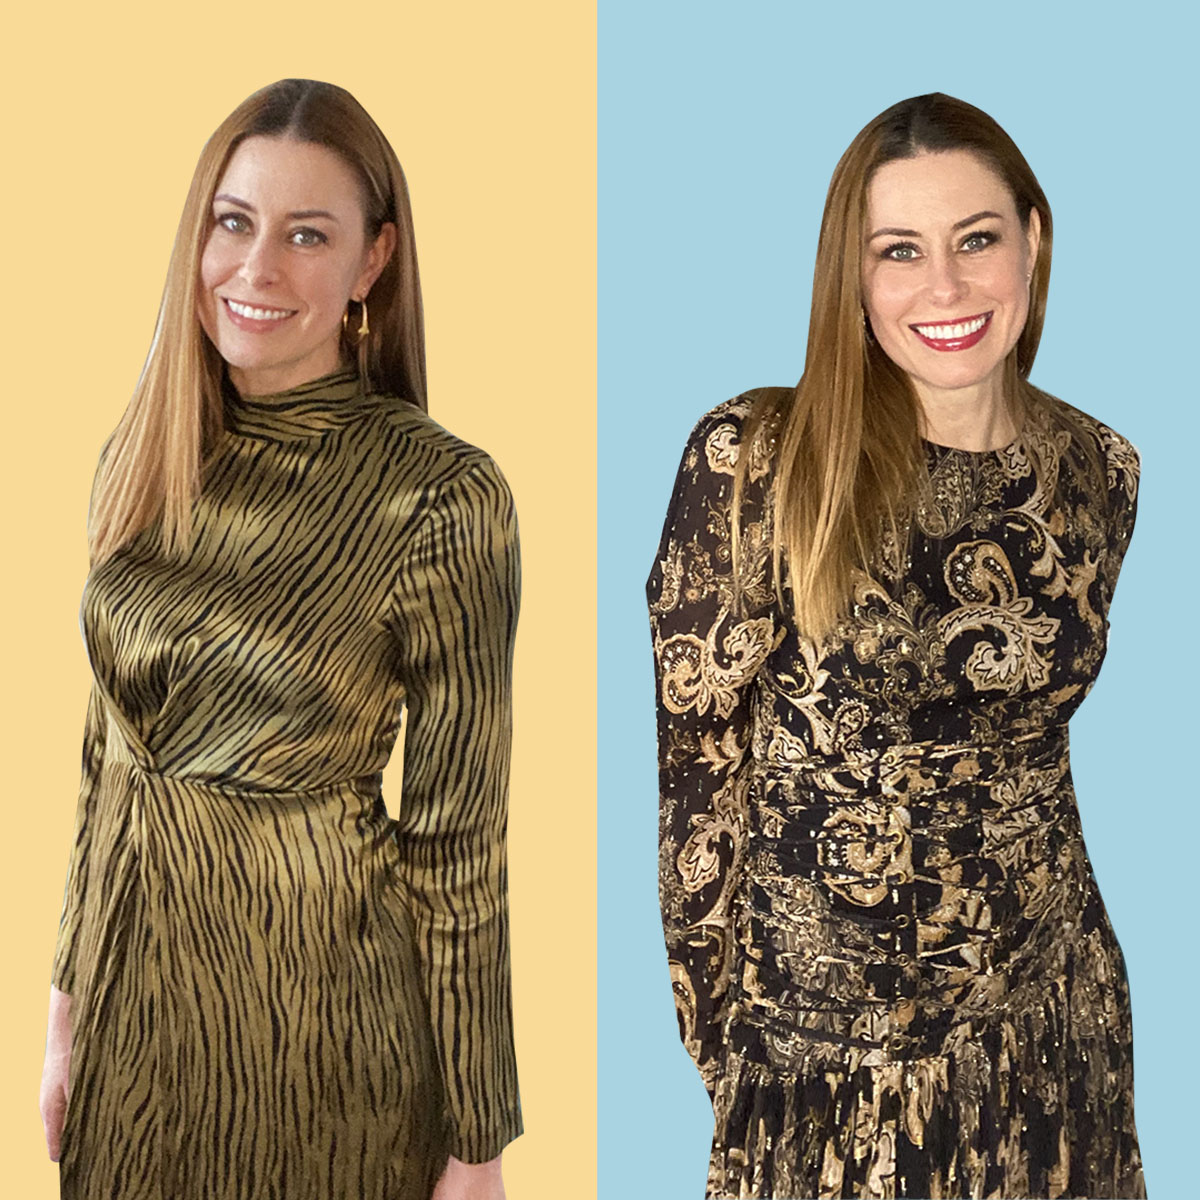 What I’m Wearing This Week: Rent the Runway